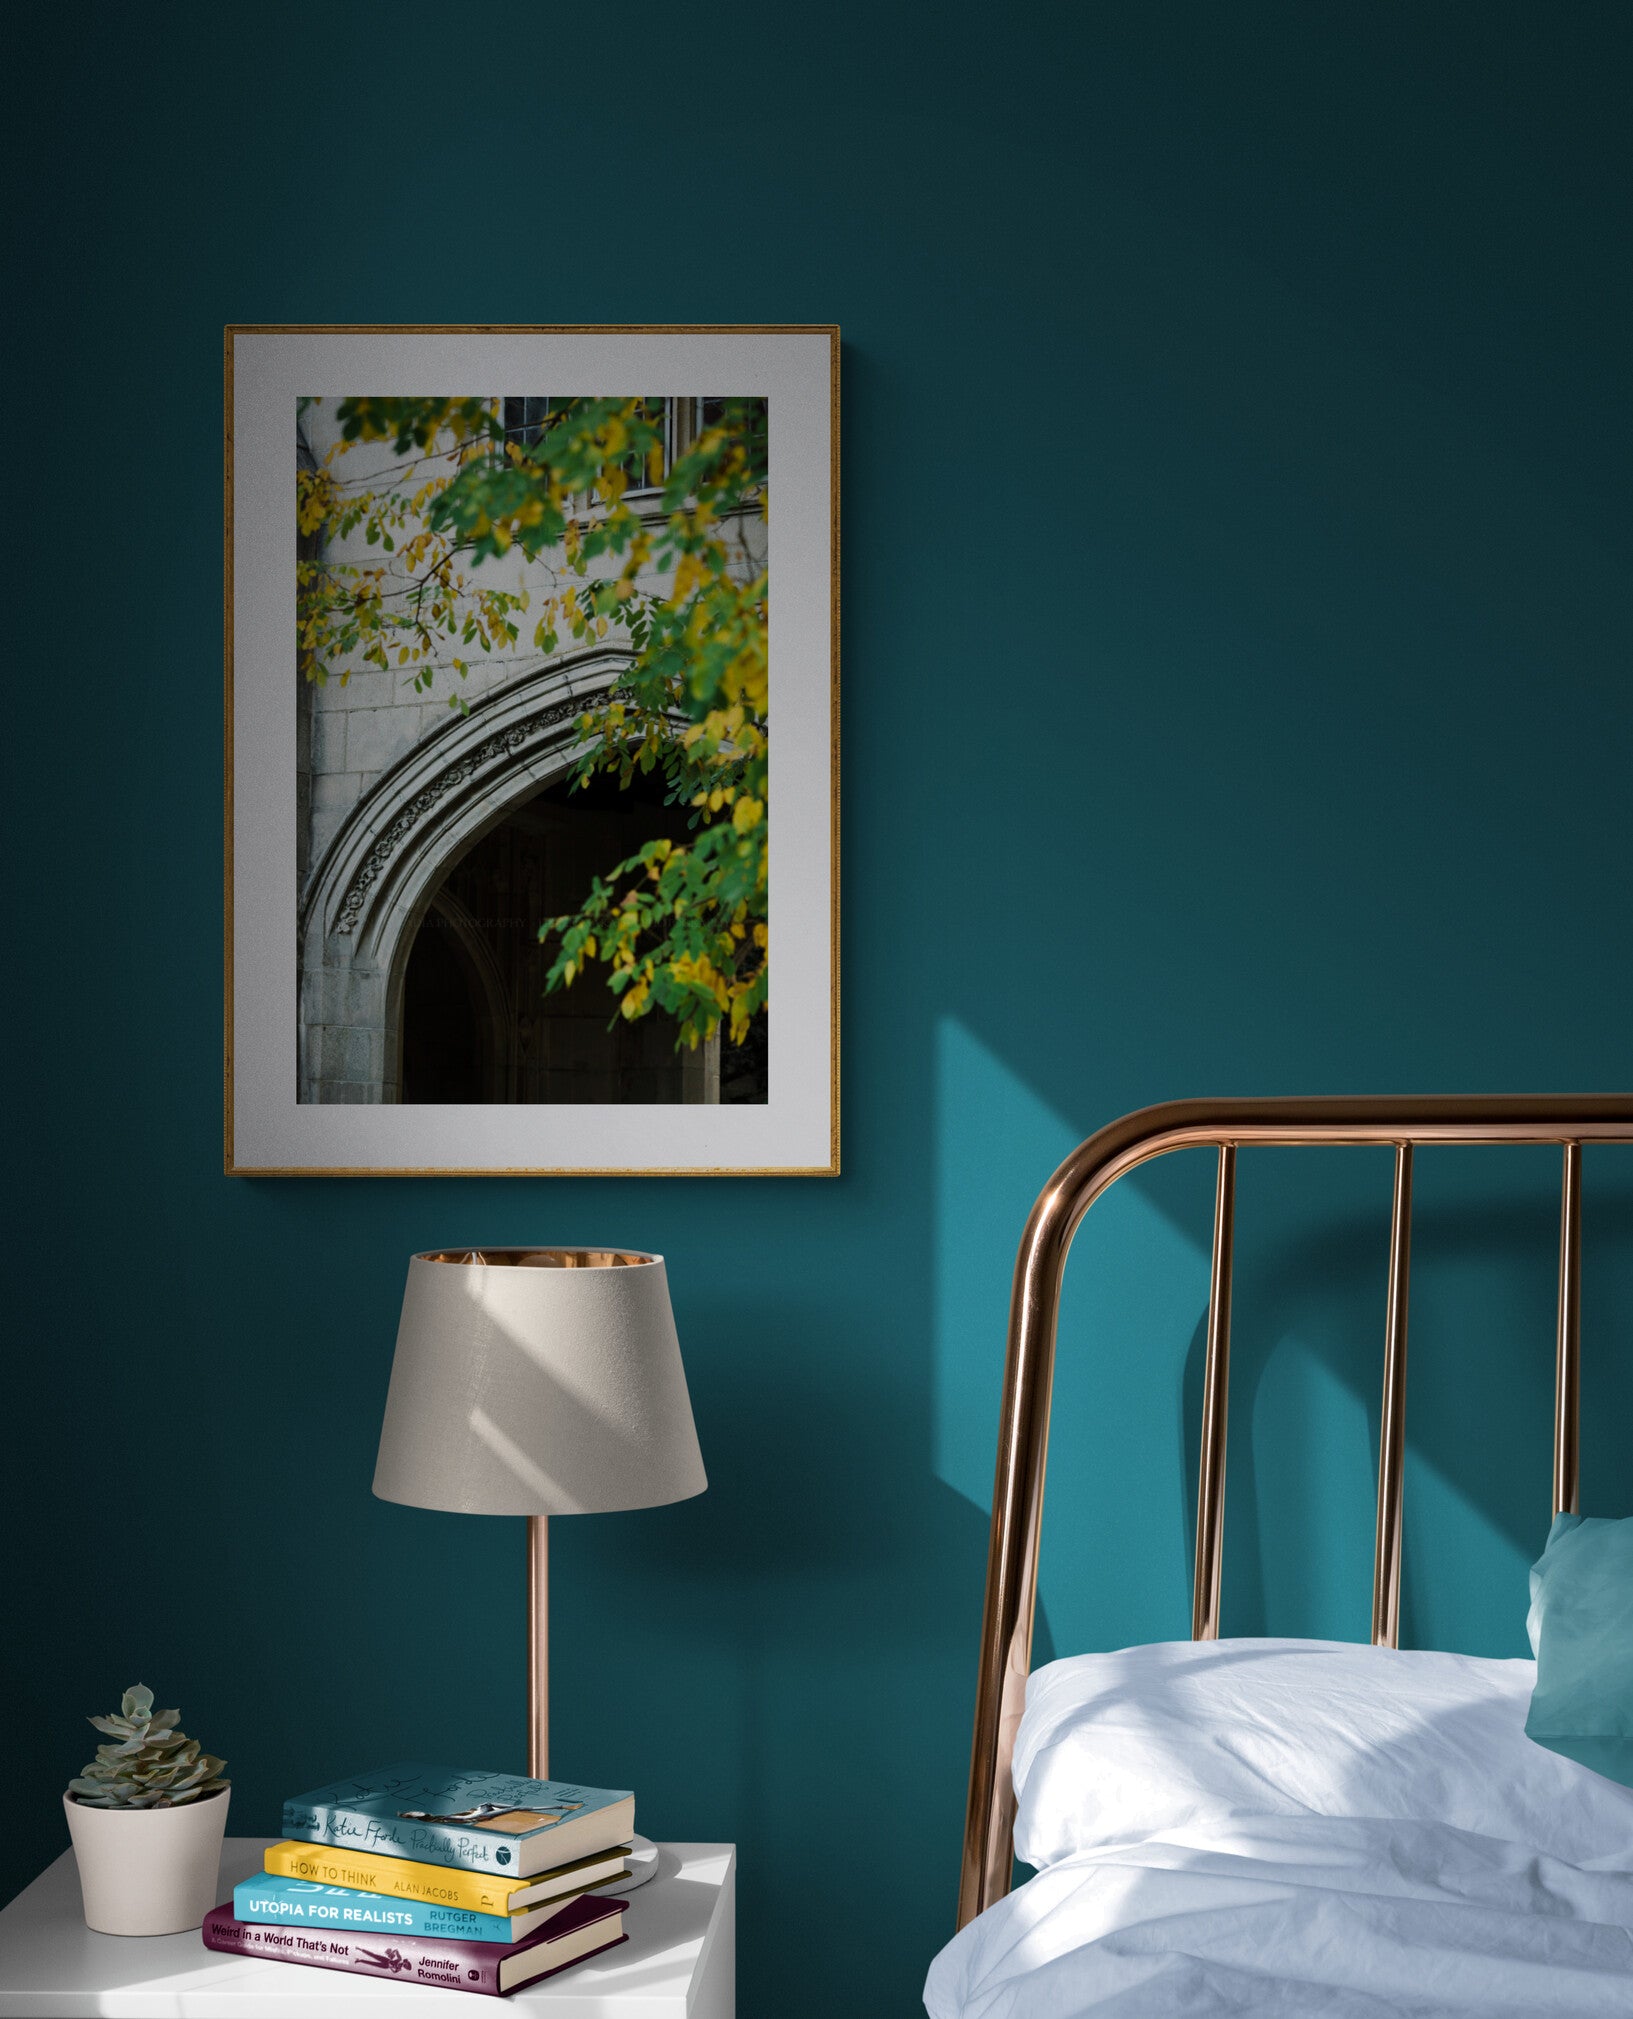 Wellesley College Photograph as Wall Art in a Bedroom